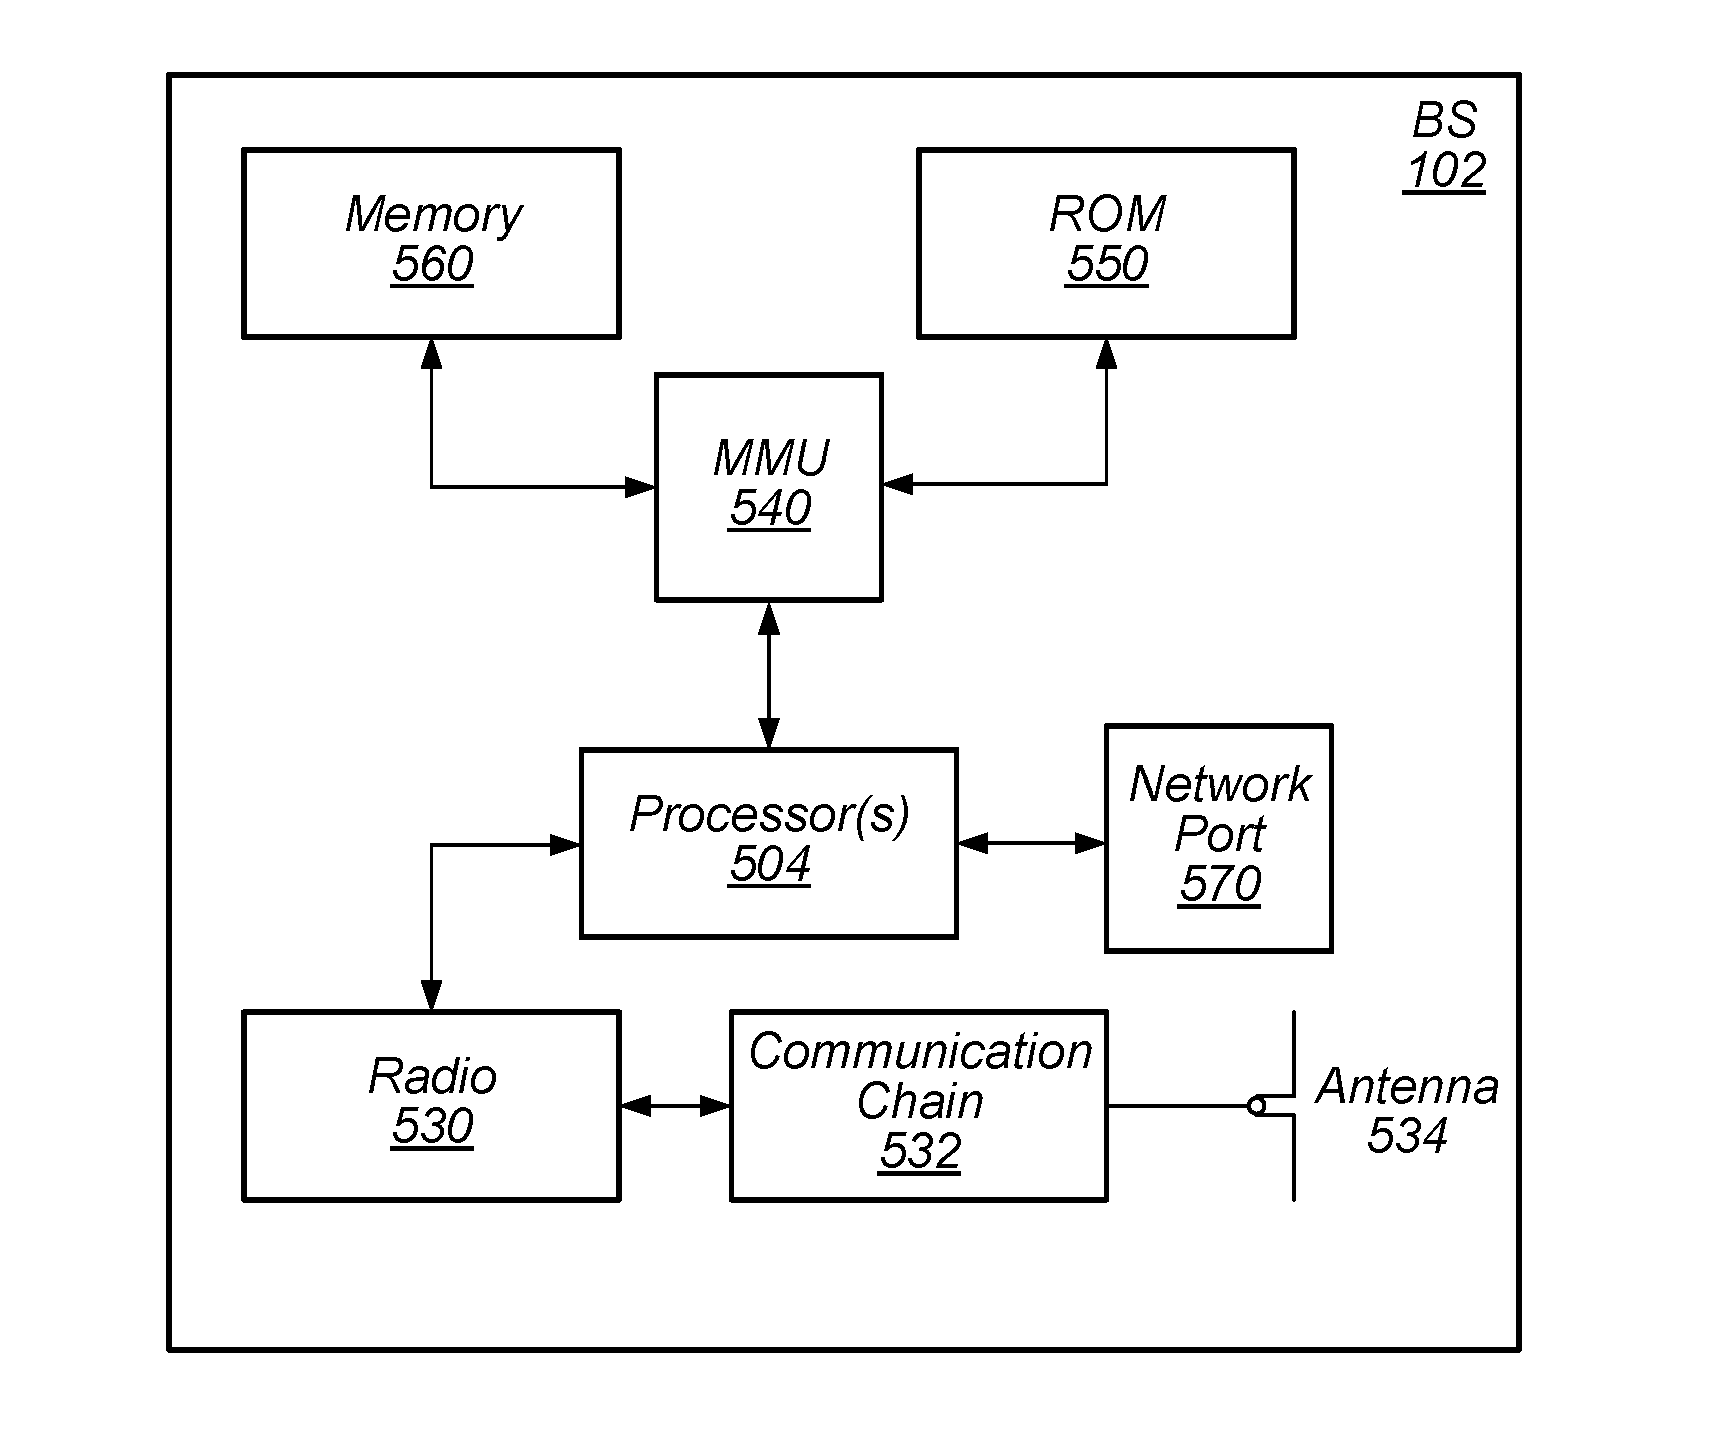 Link Quality Based Single Radio-Voice Call Continuity and Packet Scheduling for Voice over Long Term Evolution Communications